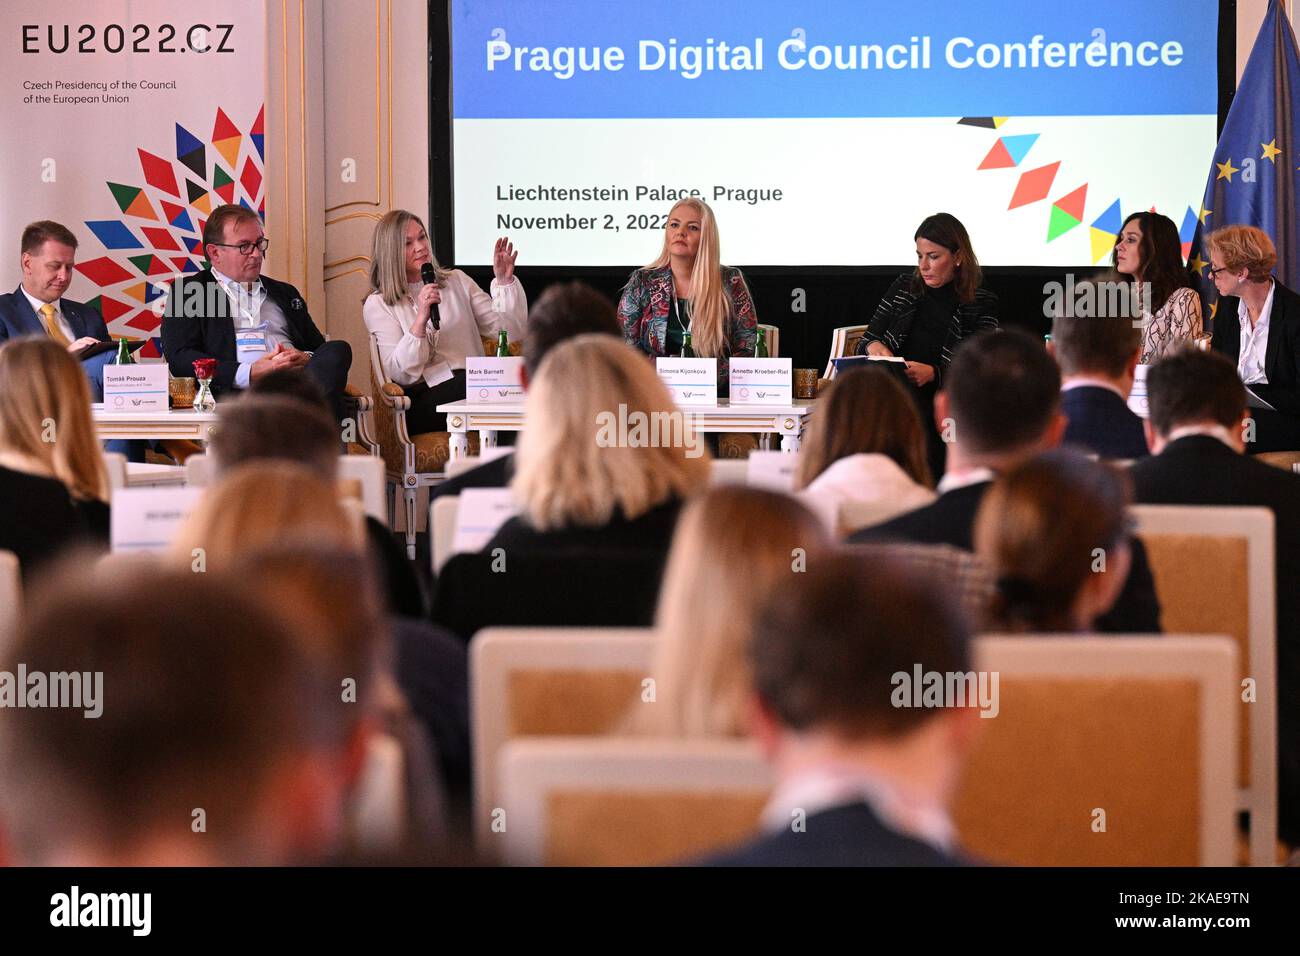 (L-R) Czech Chamber of Commerce vice-president Tomas Prouza, Mark Barnett of Mastercard Europe, Lucy C. Cronin of Amazon, Simona Kijonkova of Packeta, Anette Kroeber-Riel of Google, Julia Reuss of META and Frances Burwell of Atlantic Council during the panel discussion at the Prague Digital Council conference on support of digitisation and innovation, future development of new technologies in industry, trade and banking, organised in cooperation with Atlantic Council think tank as part of Czechia's EU presidency in Prague, Czech Republic, November 2, 2022. (CTK Photo/Michal Kamaryt) Stock Photo